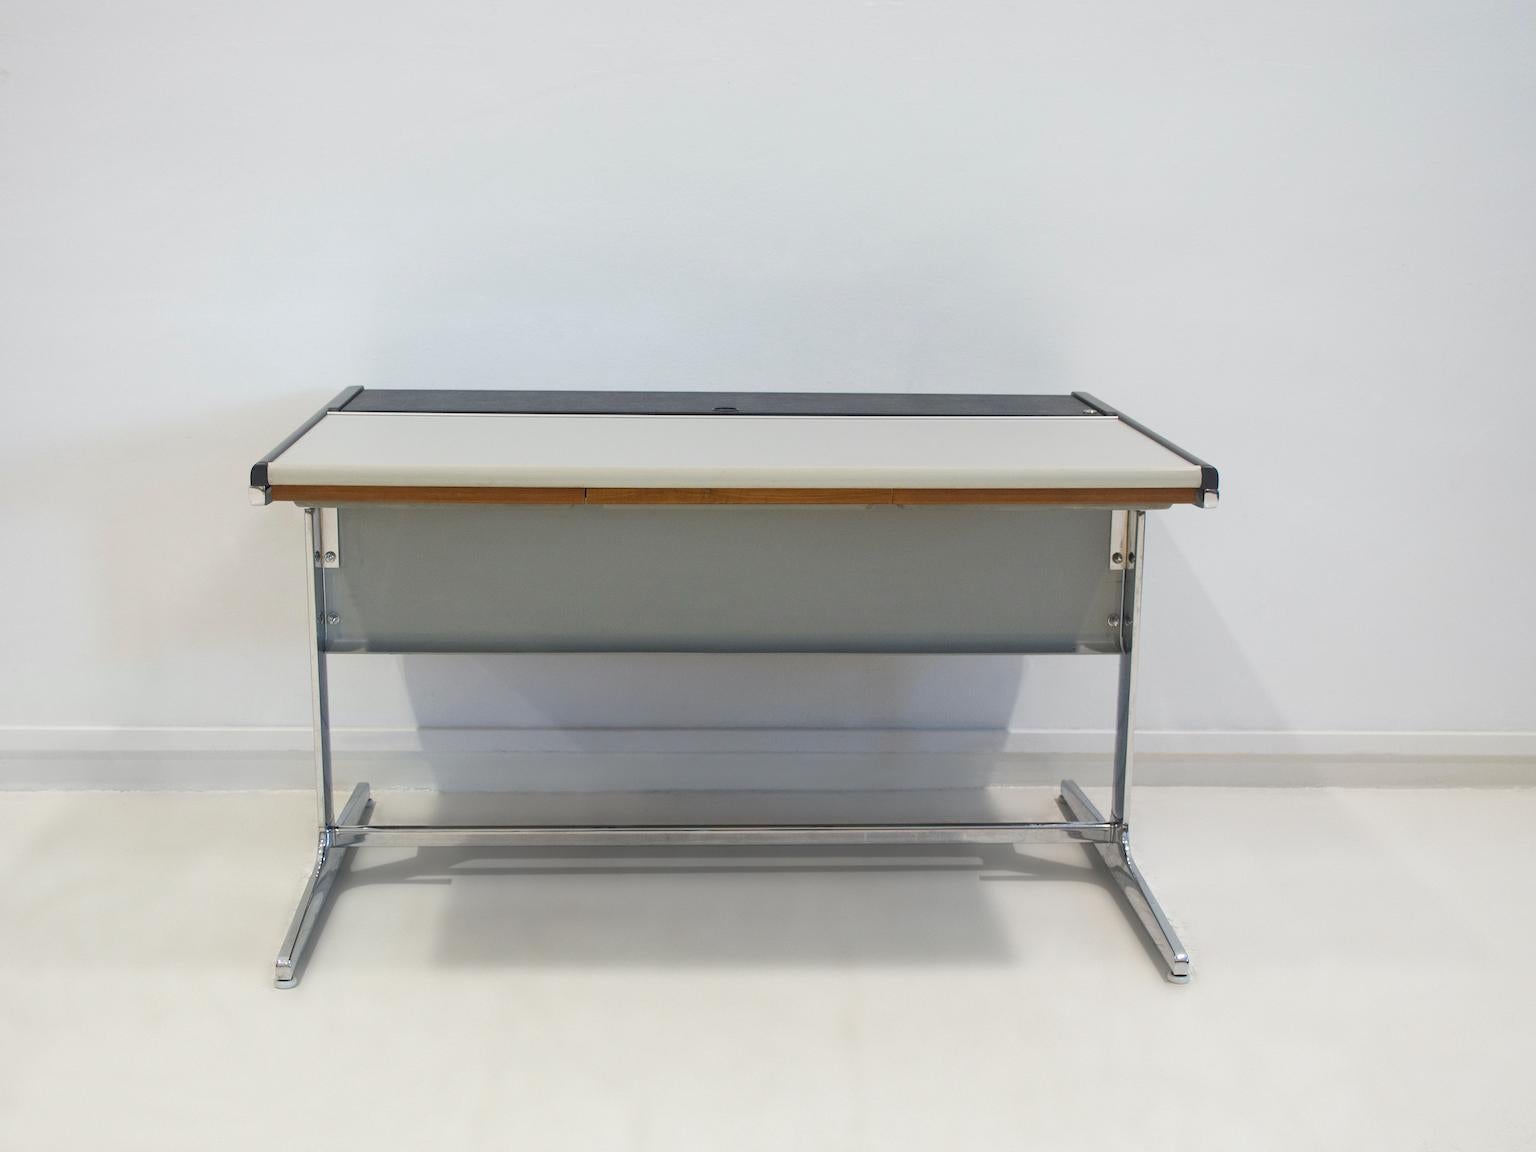 Action Office desk, model 64 902, designed by George Nelson & Robert Propst for Herman Miller from the 1960s. Base made of chrome-plated aluminum with white plastic protectors. Lockable hinged cover with a black synthetic leather coating and a gray